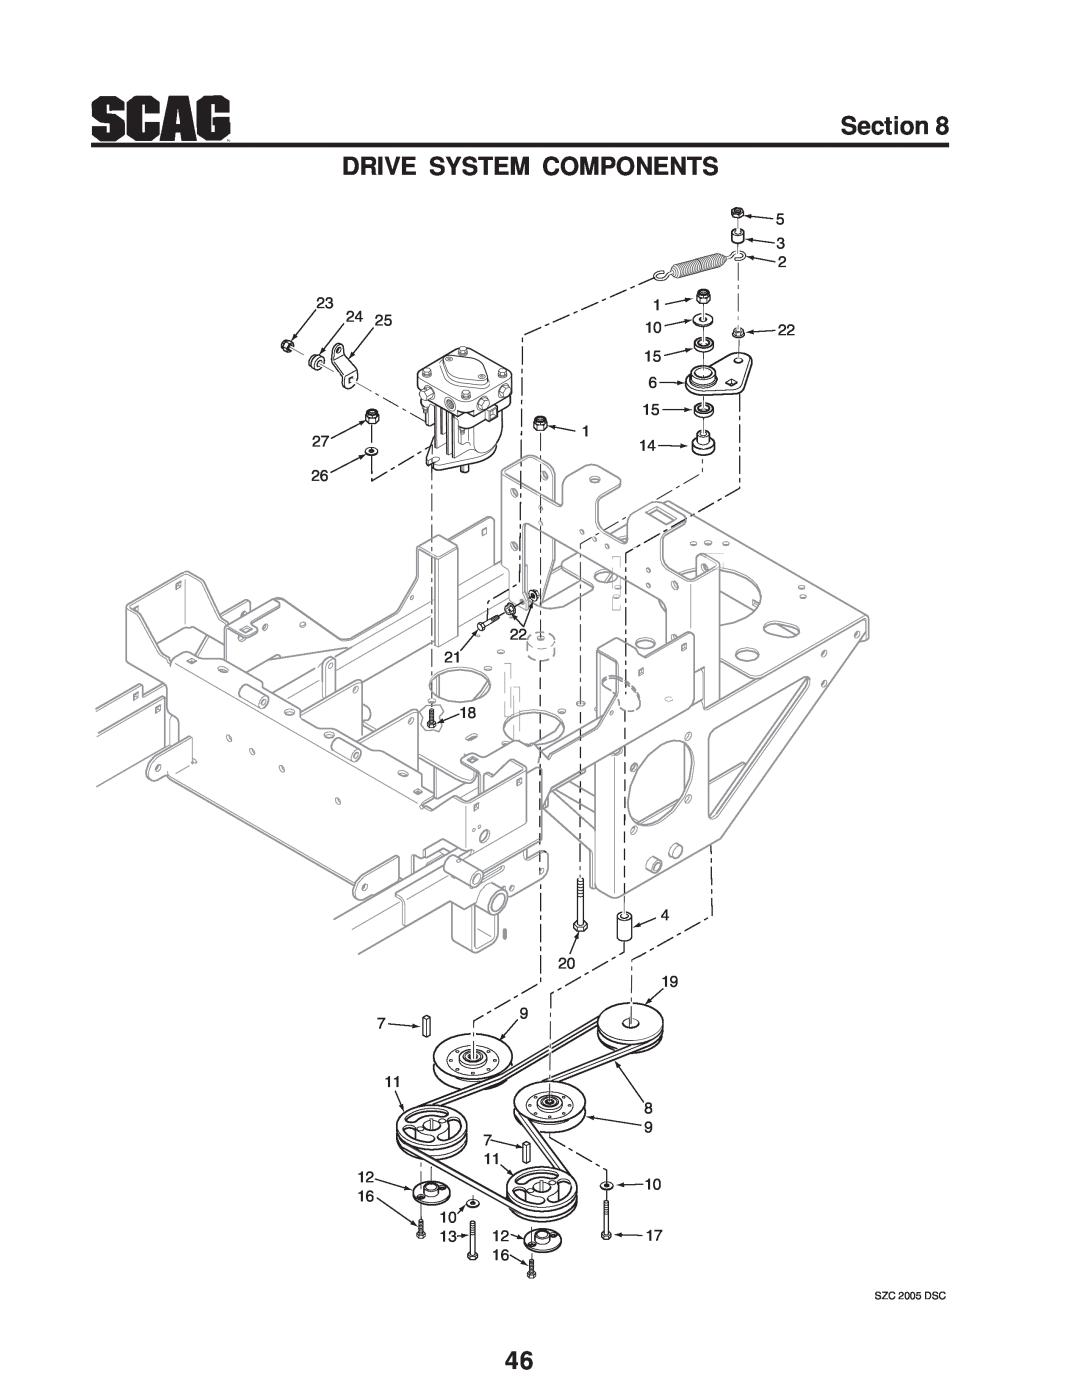 Scag Power Equipment manual Section DRIVE SYSTEM COMPONENTS, SZC 2005 DSC 